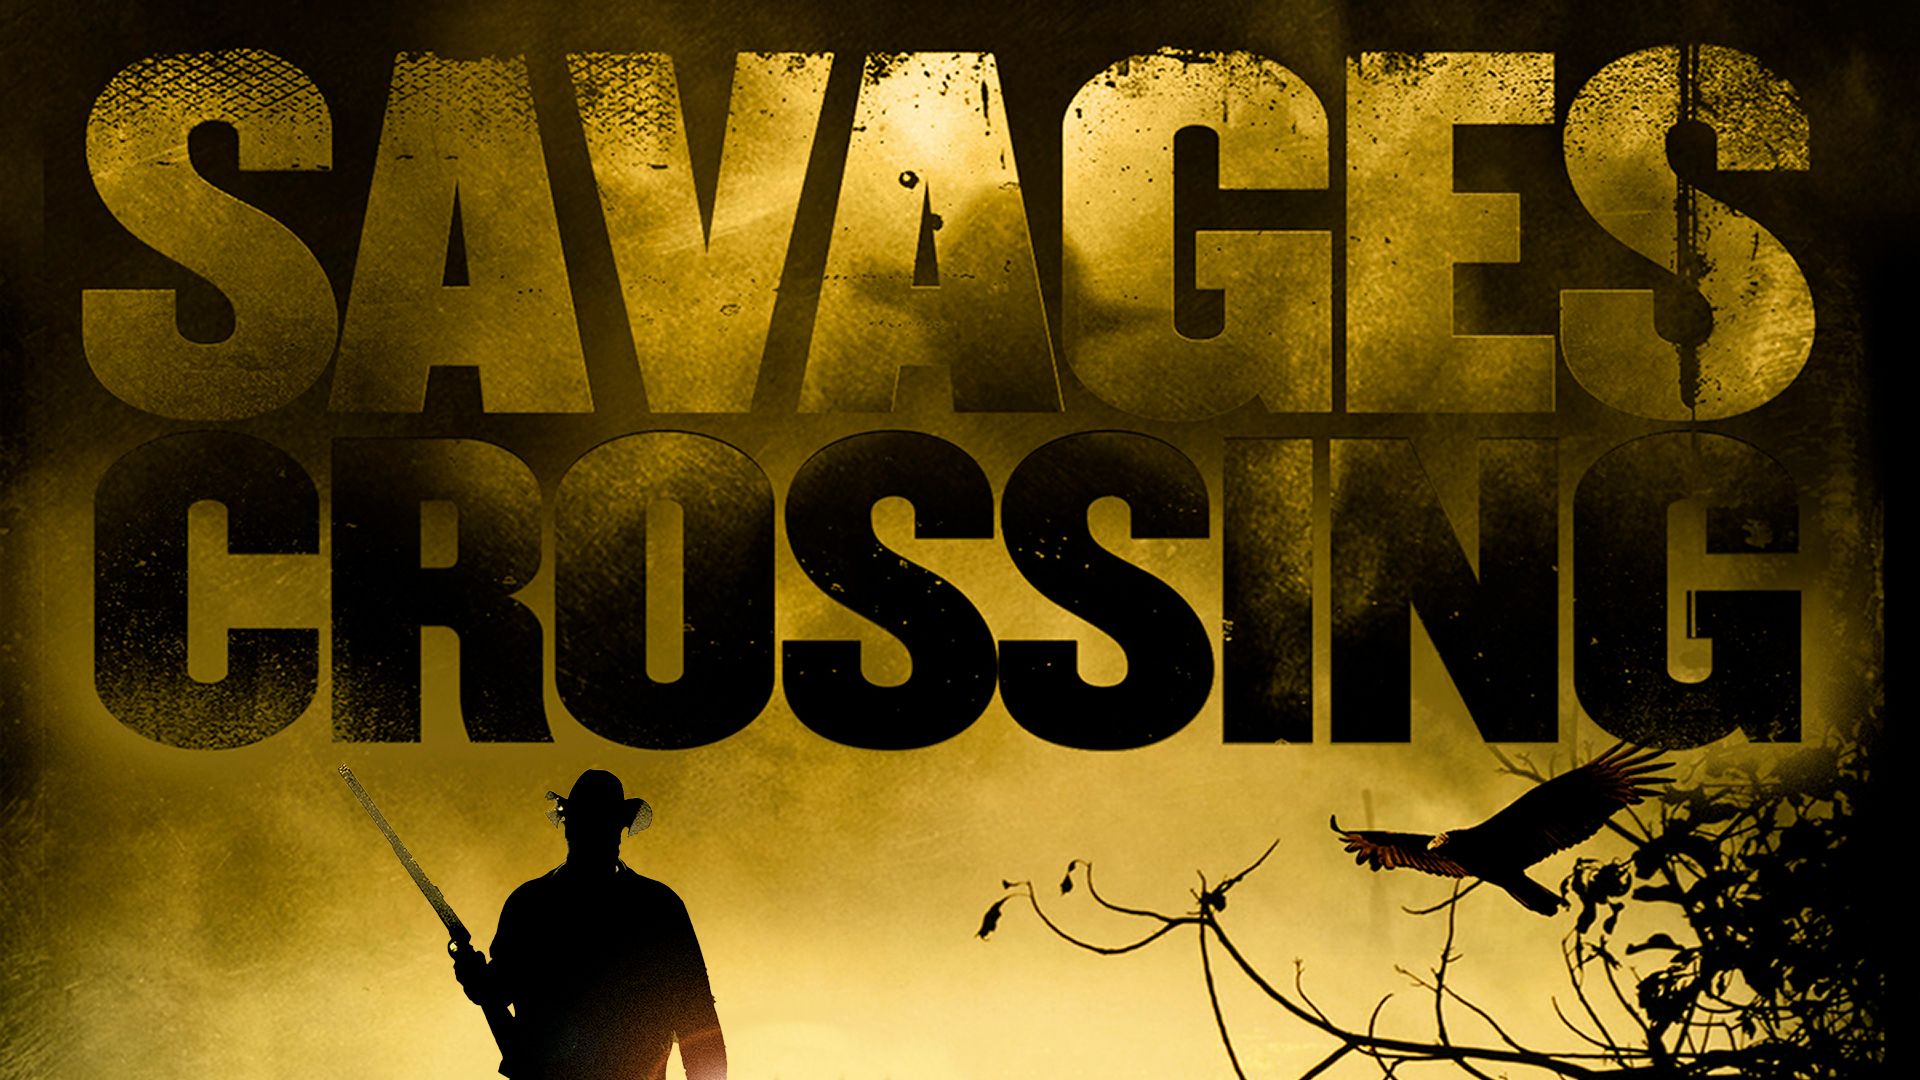 Savages Crossing Backdrop